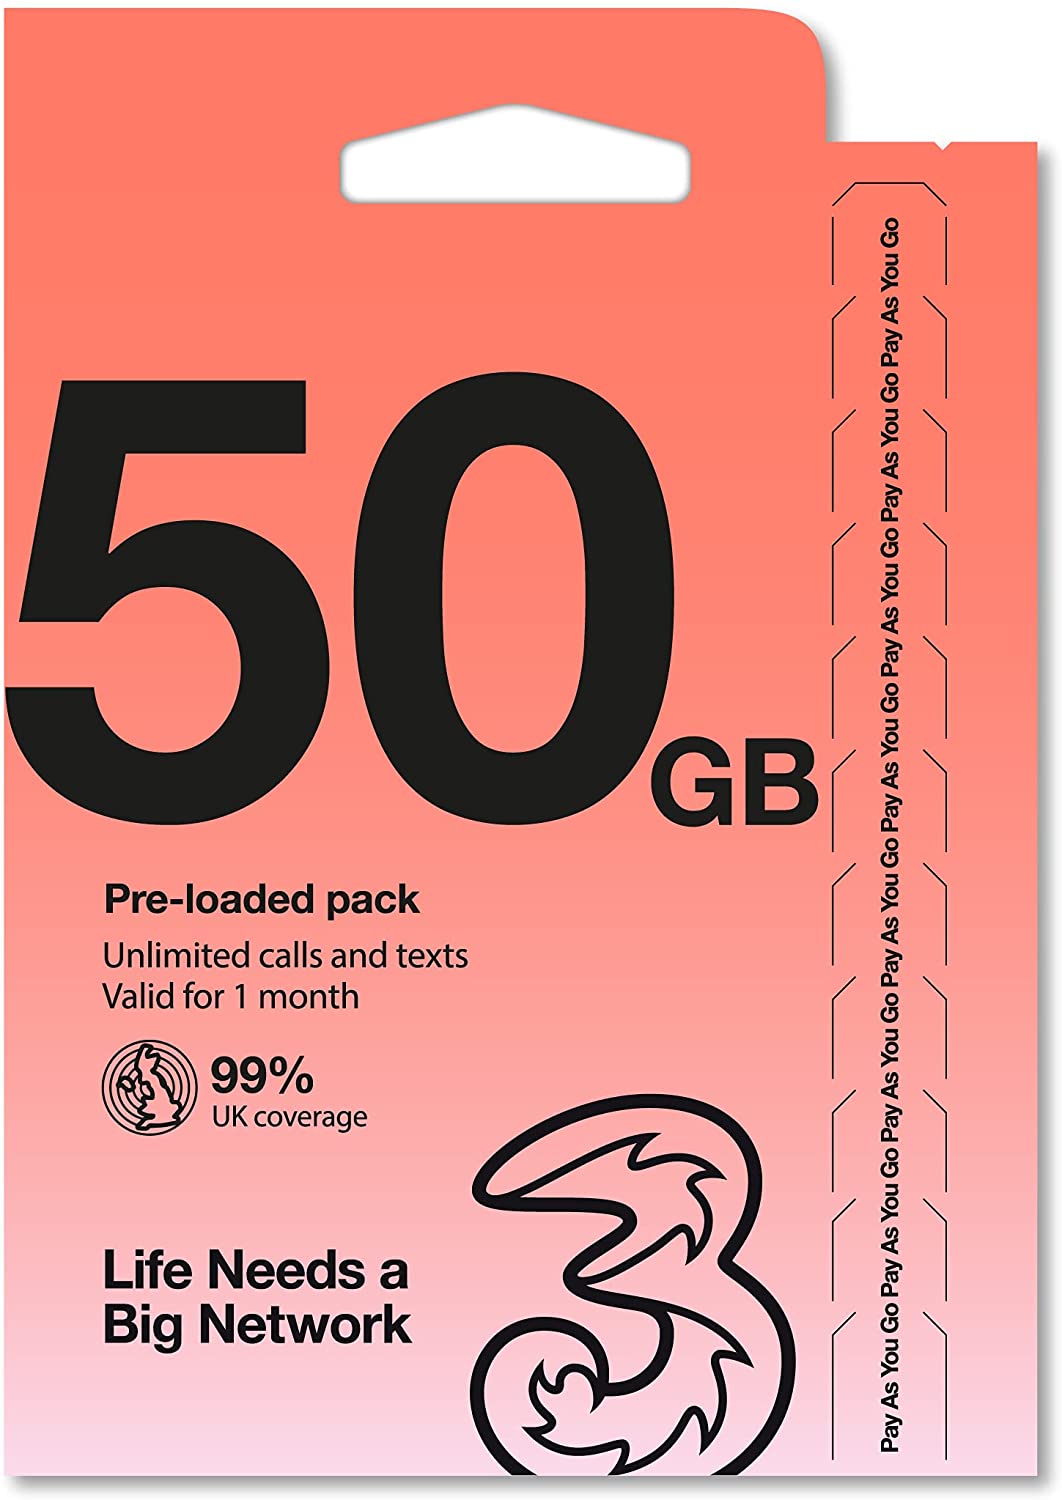 Three New Supercherged data pack includes 50GB data with unlimited minutes and texts.